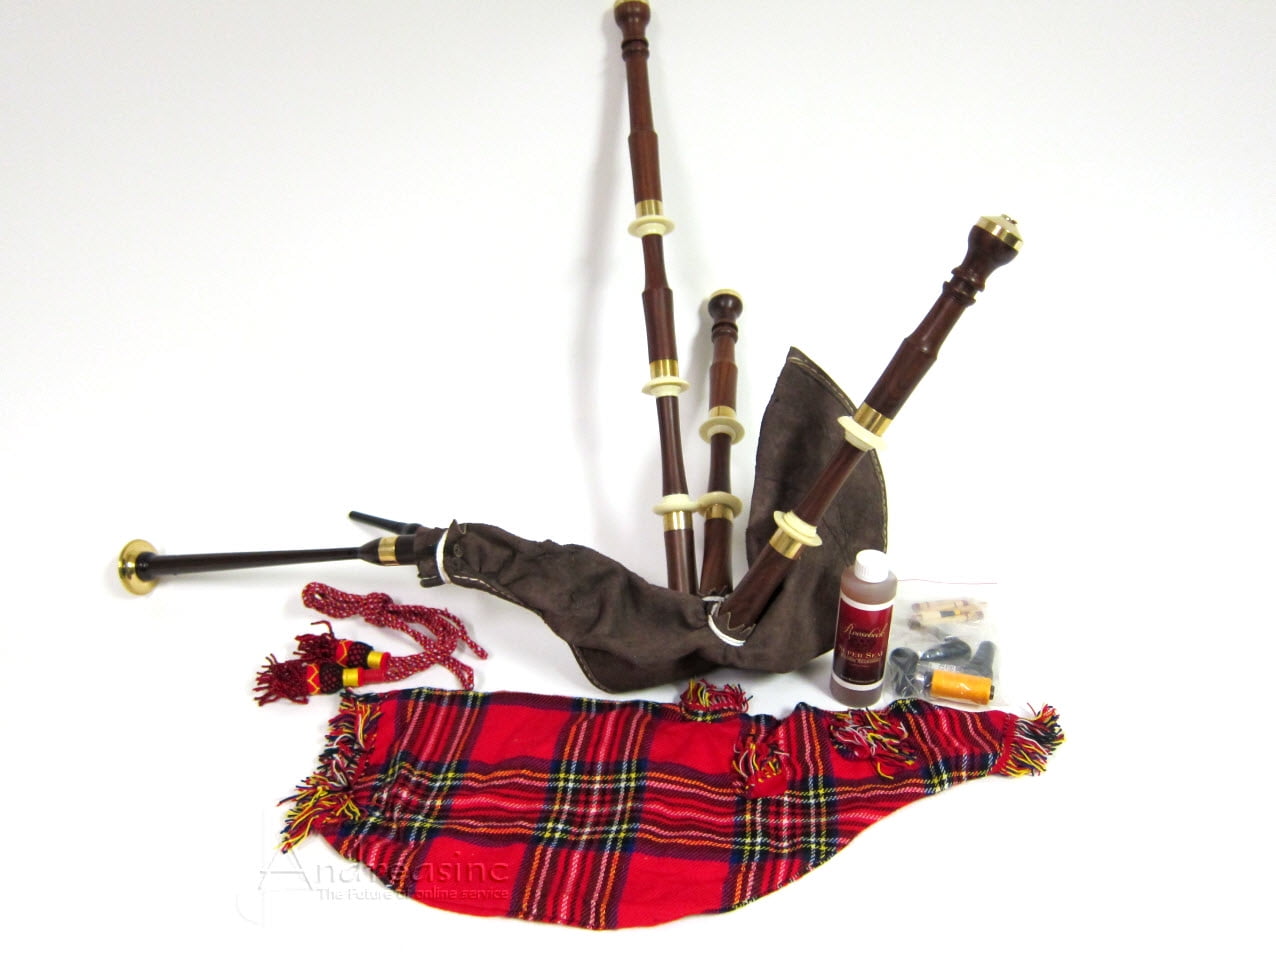 GREAT SCOTTISH HIGHLAND BAGPIPE AIR BAG COVER SIZE 30 X 12 VARIOUS TARTANS ROYAL STEWART COVER